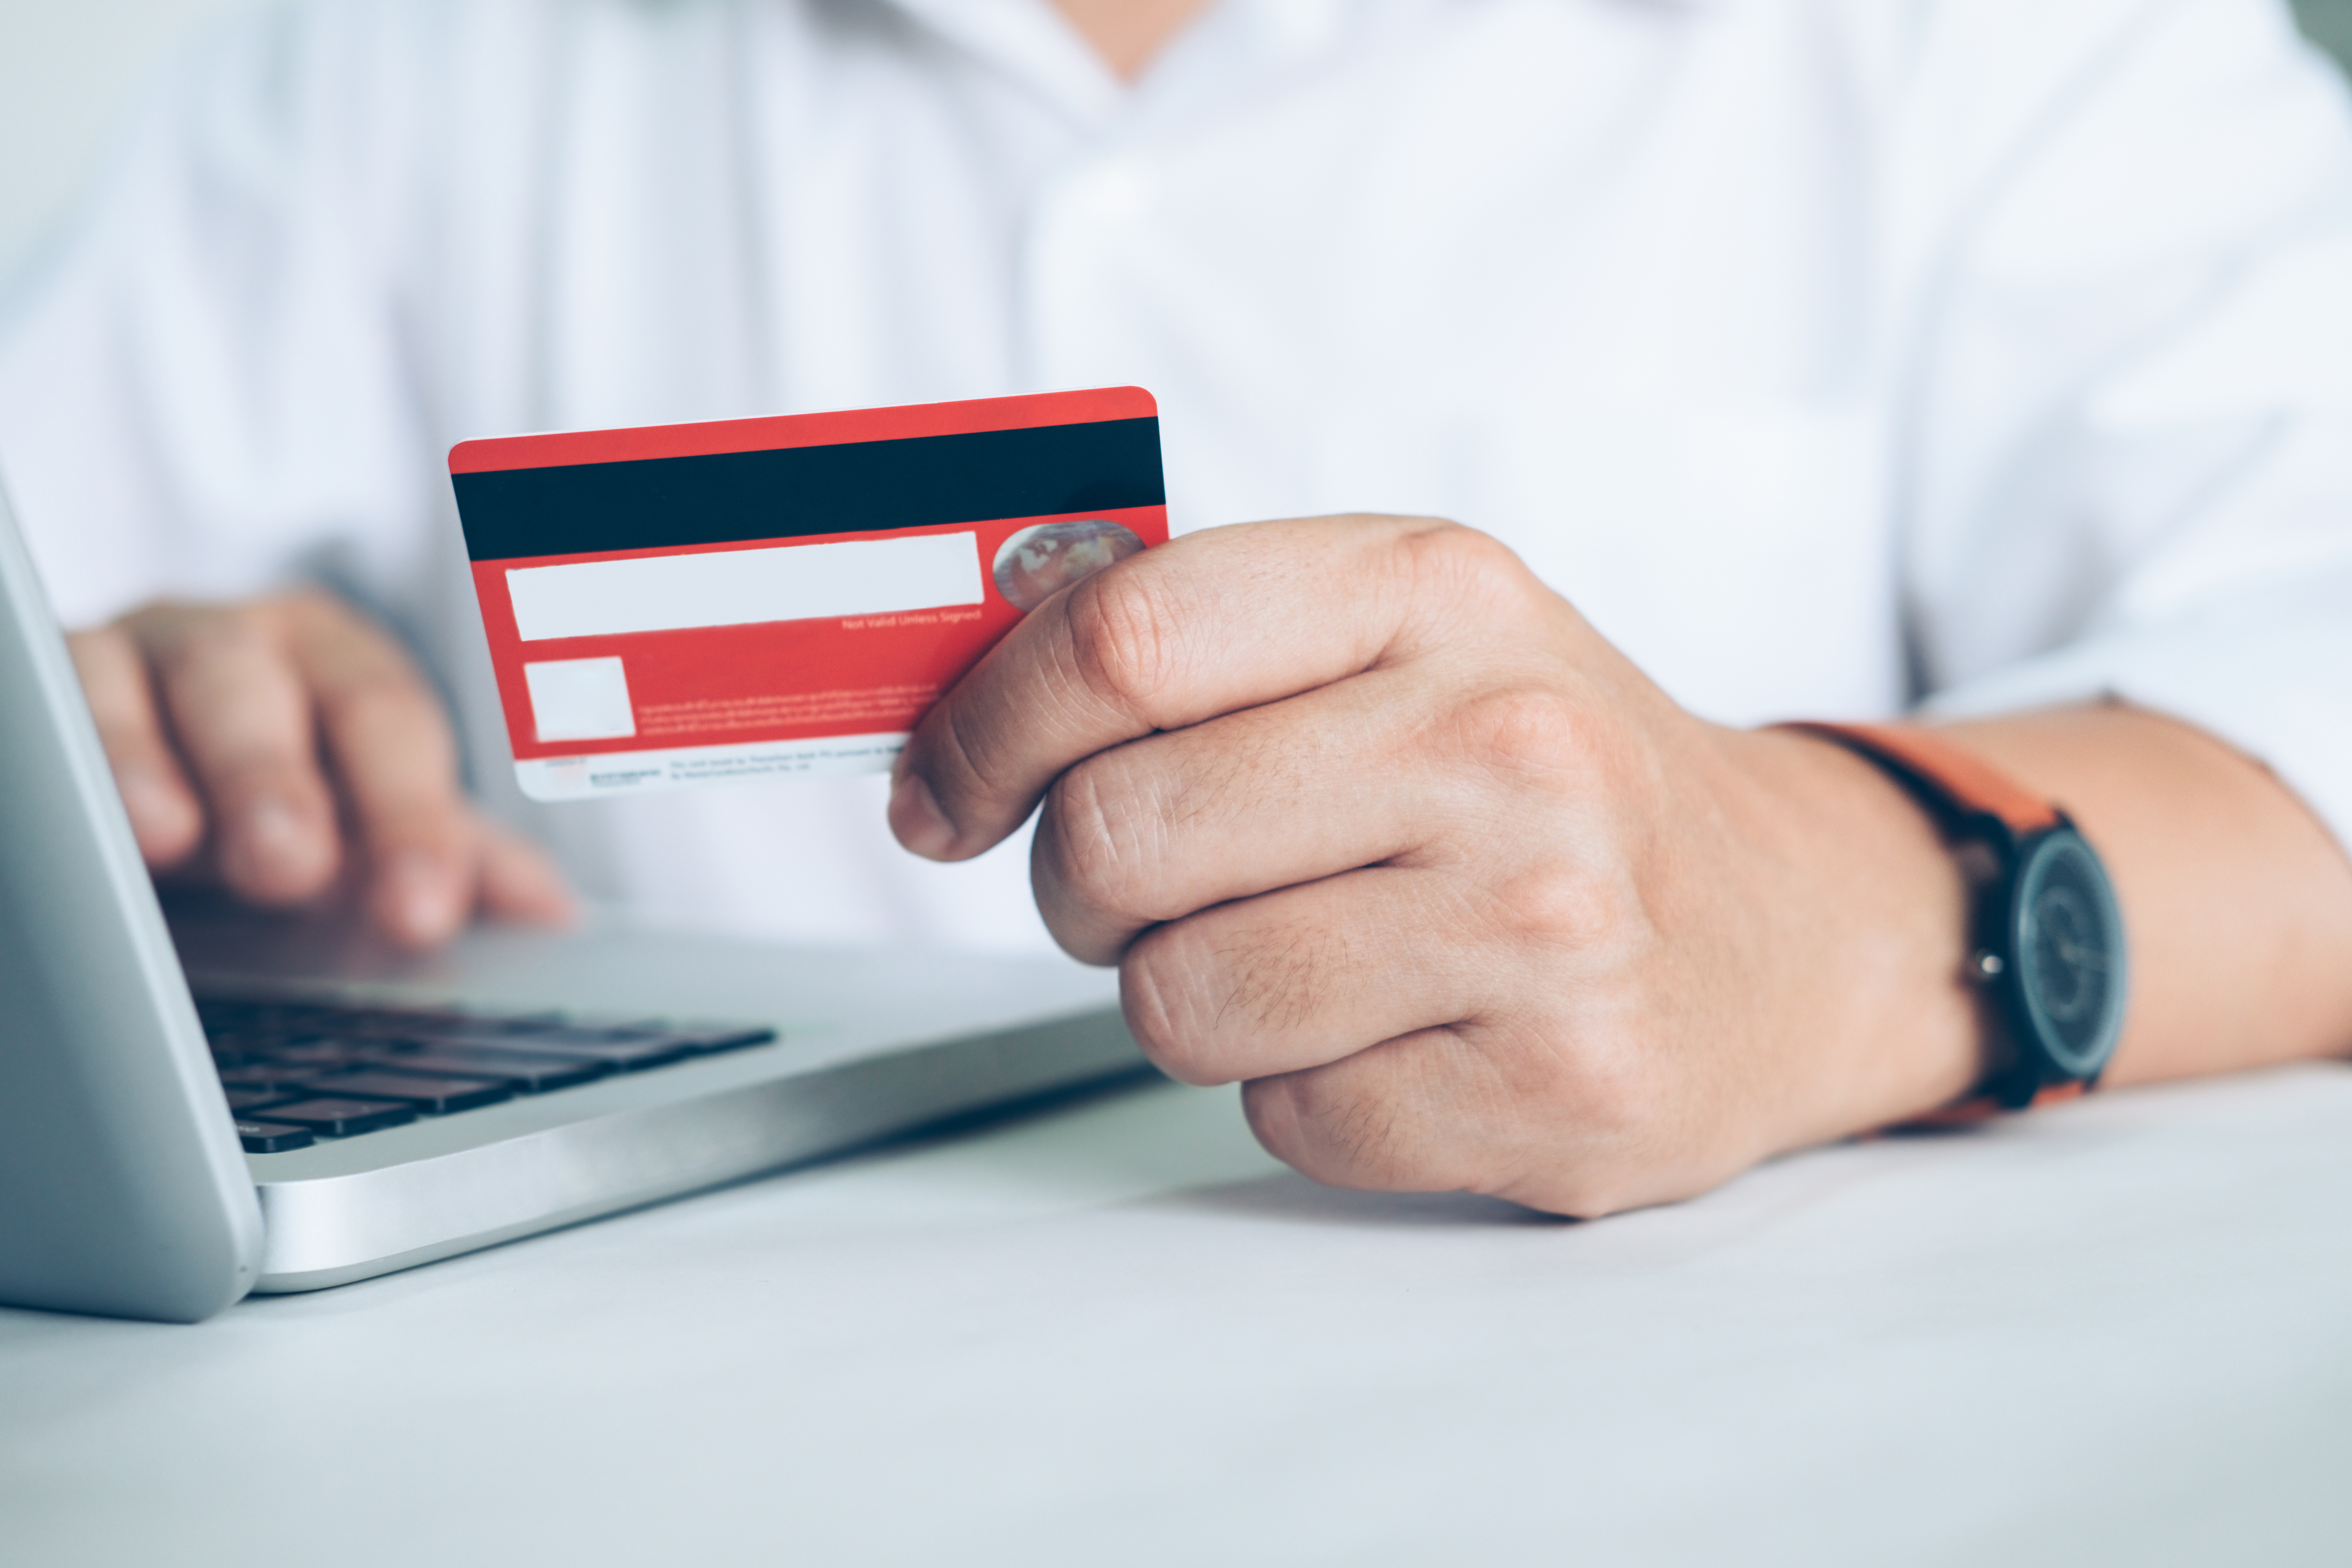 Italy’s prepaid card market expected to reach USD 60.3 billion by 2020; government regulations creating a favorable environment for prepaid card growth